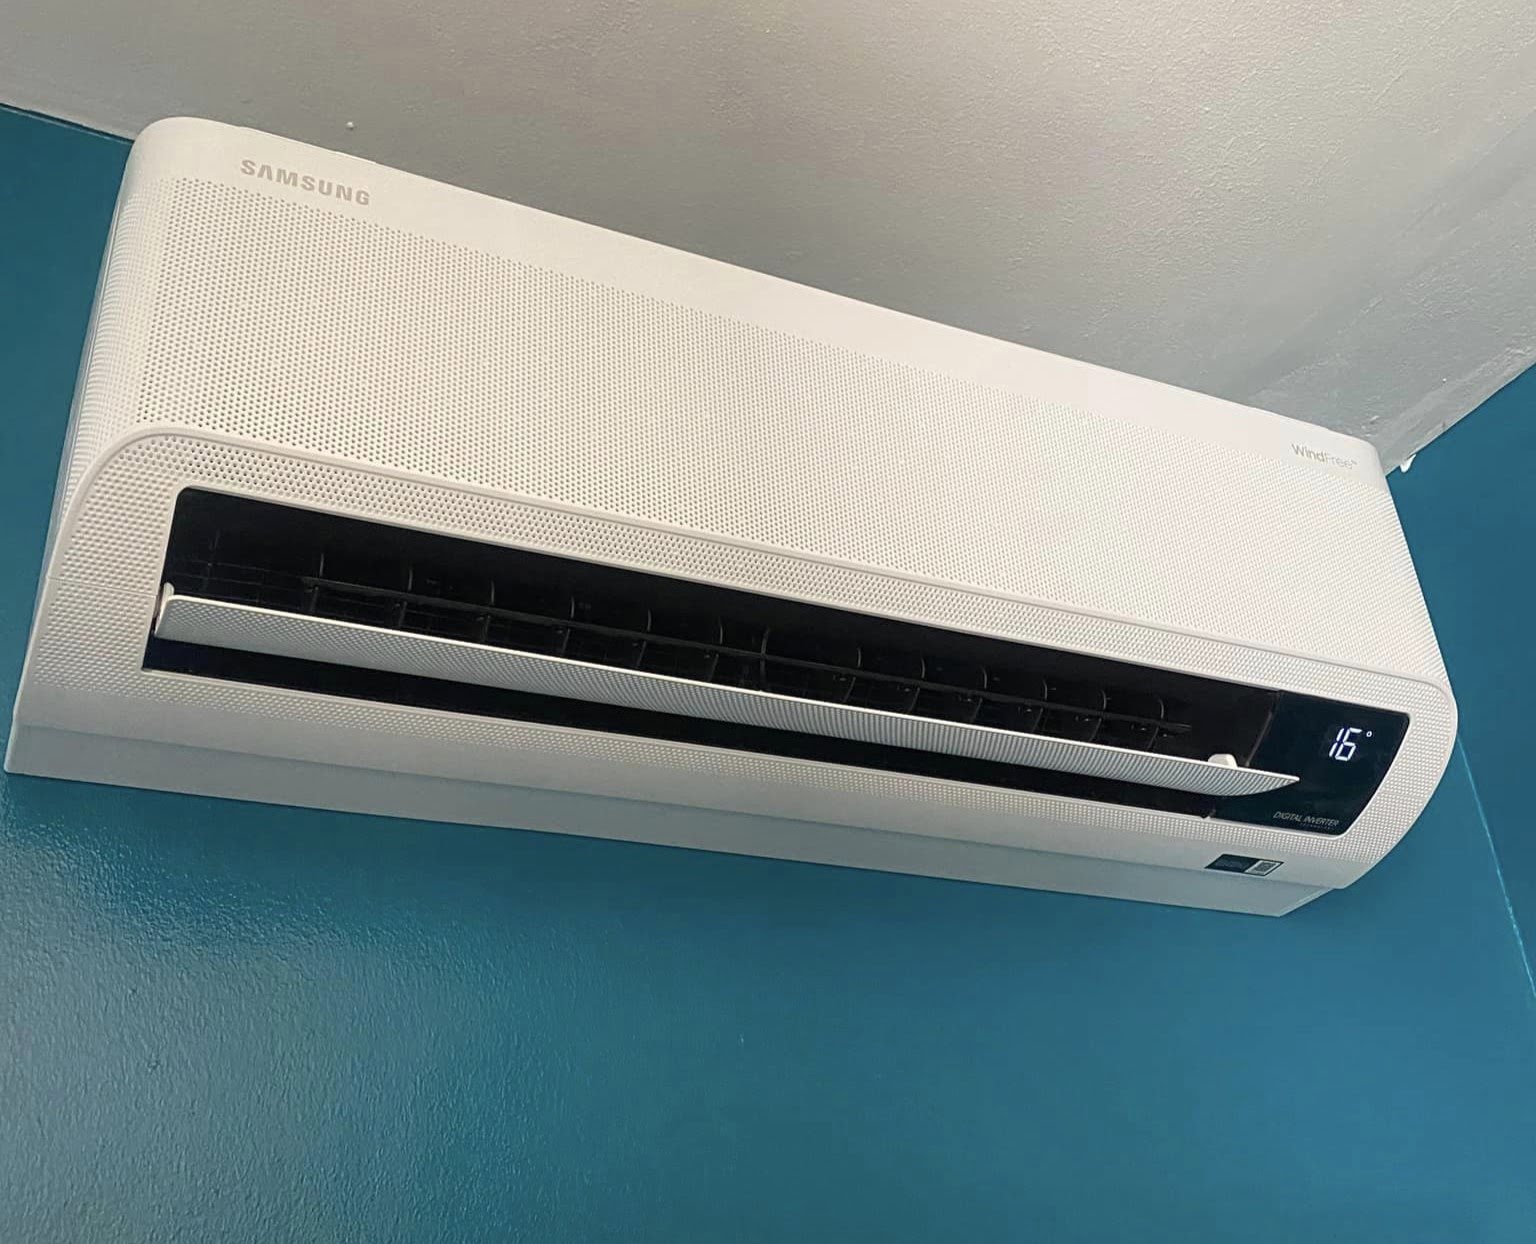 How To Fix The Error Code E307 For Samsung Air Conditioner